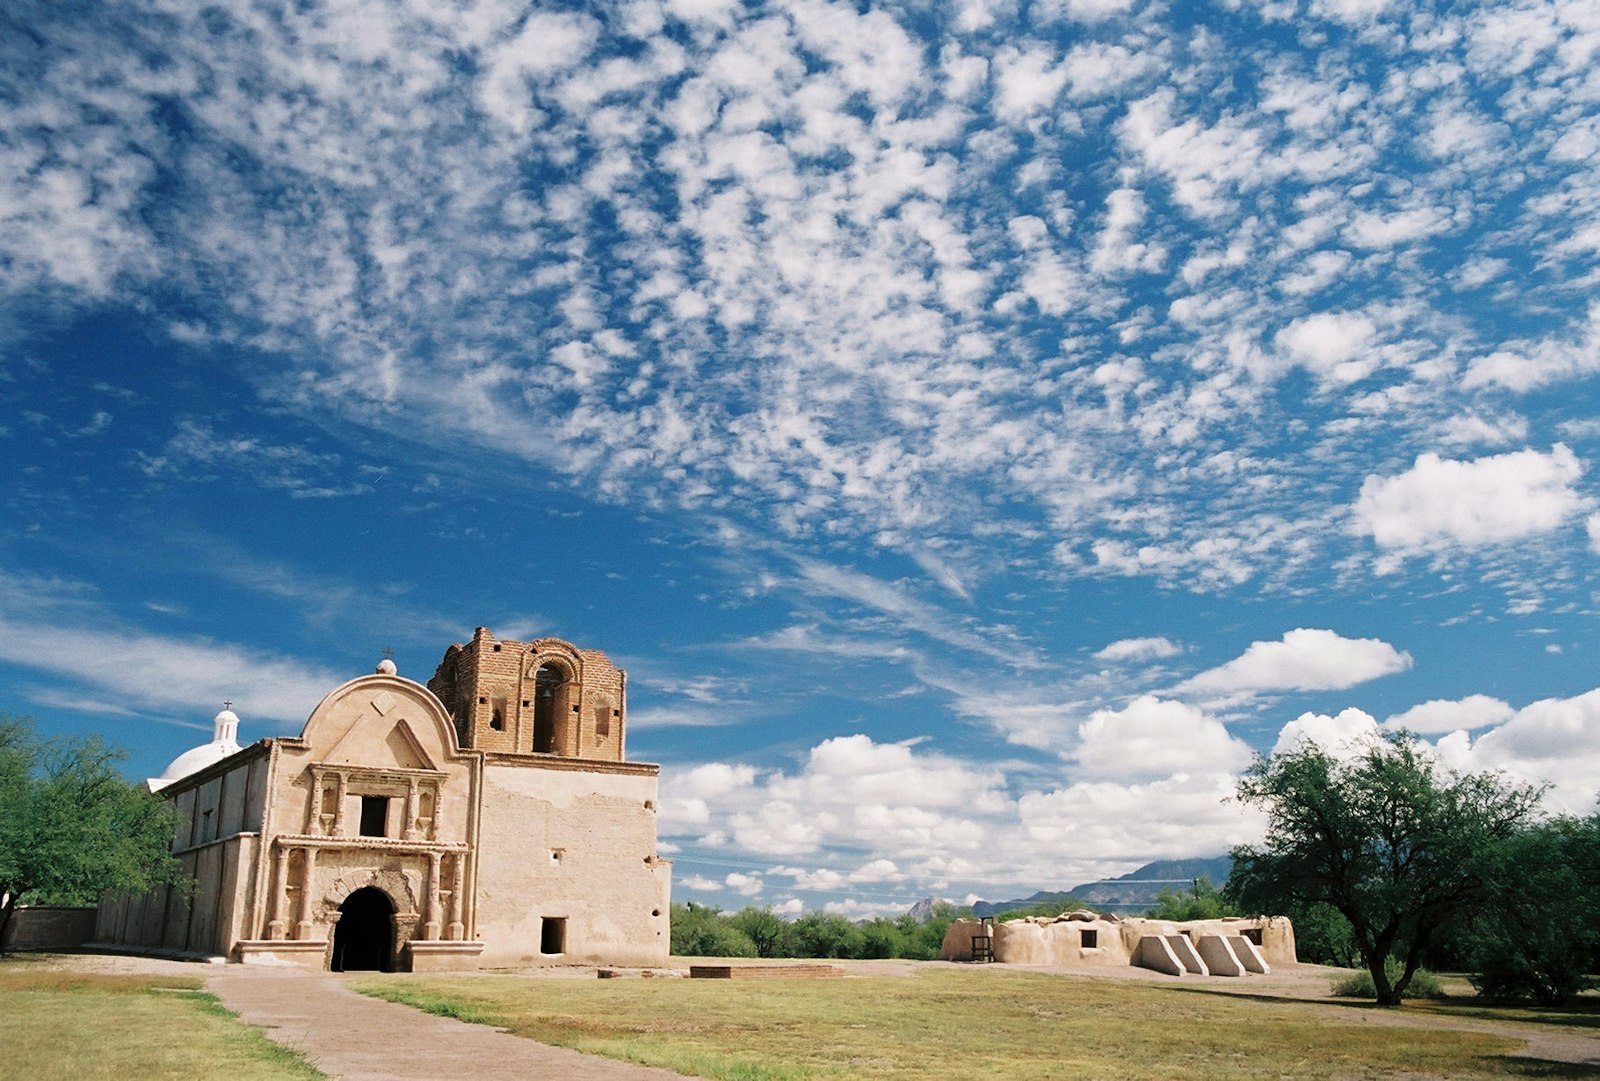 Exterior of mission-style church and Native American ruins